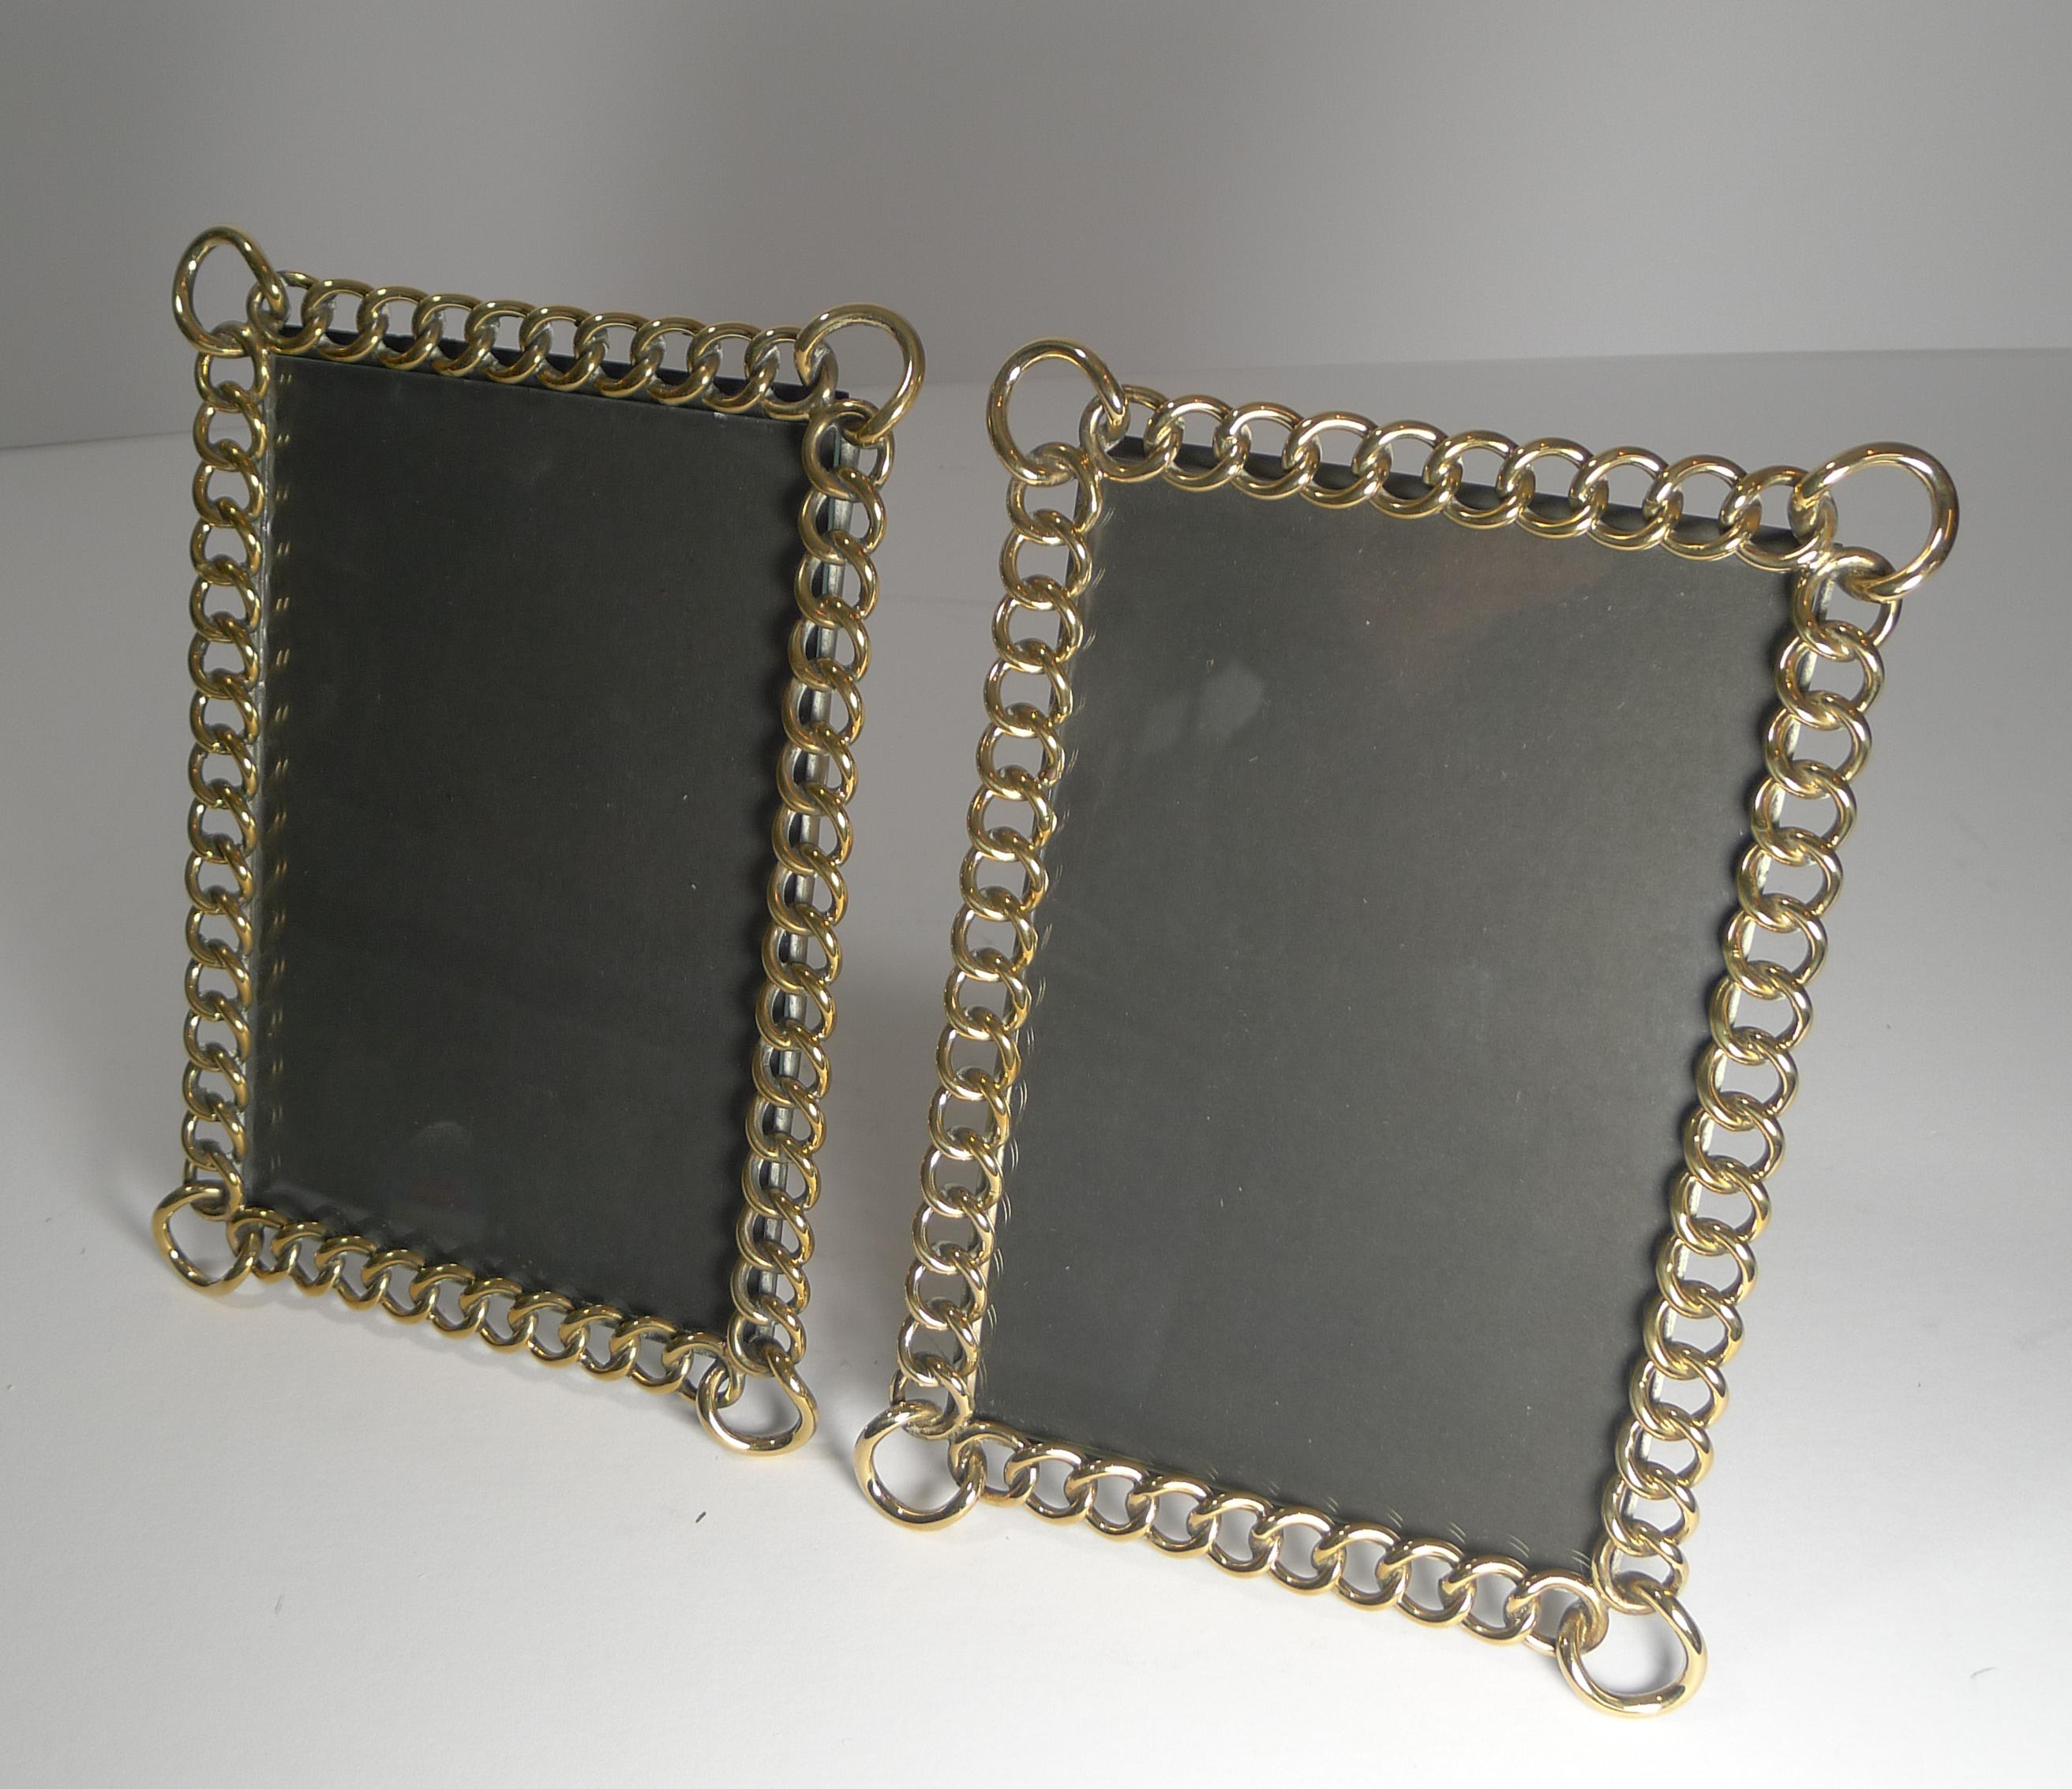 Late Victorian Pair of Antique English Polished Brass Ring Photograph Frames, circa 1890